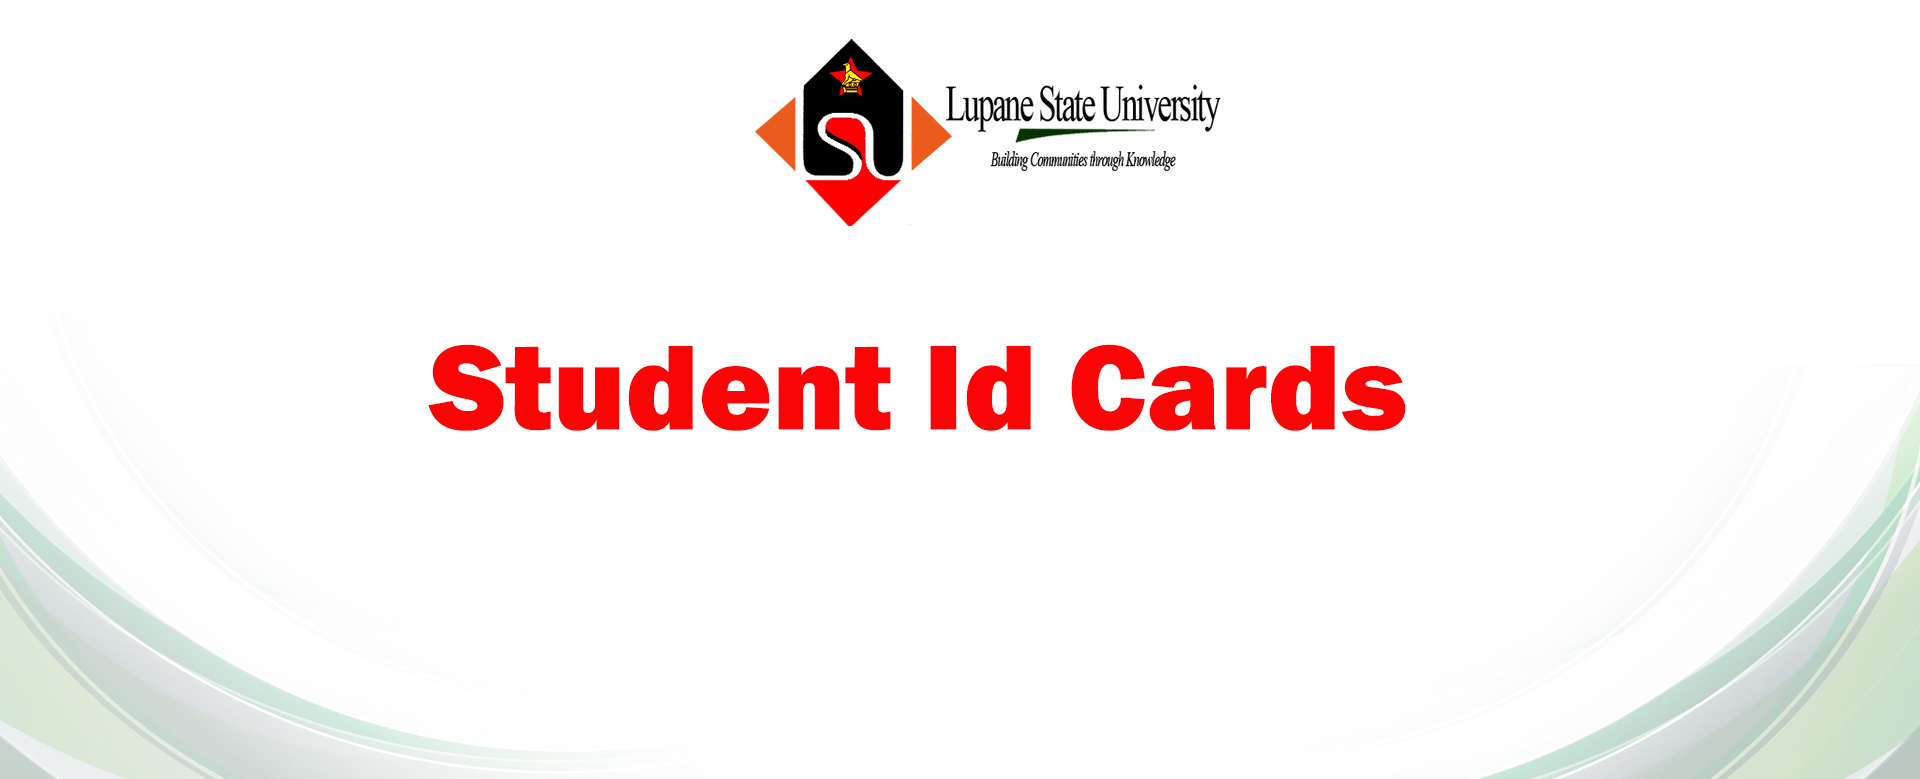 Student ID Cards